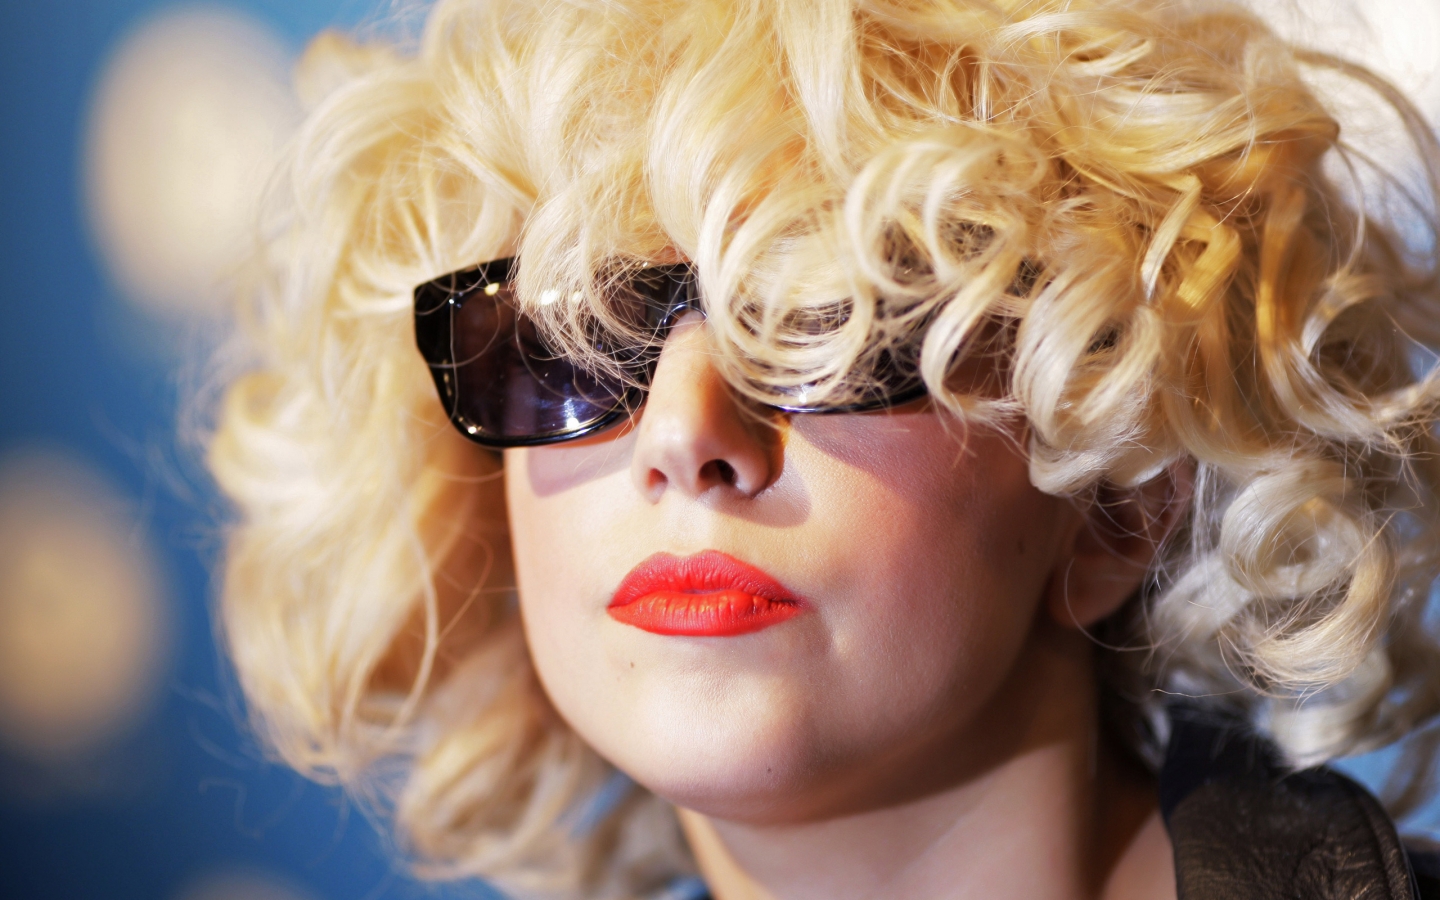 Cool Lady Gaga for 1440 x 900 widescreen resolution